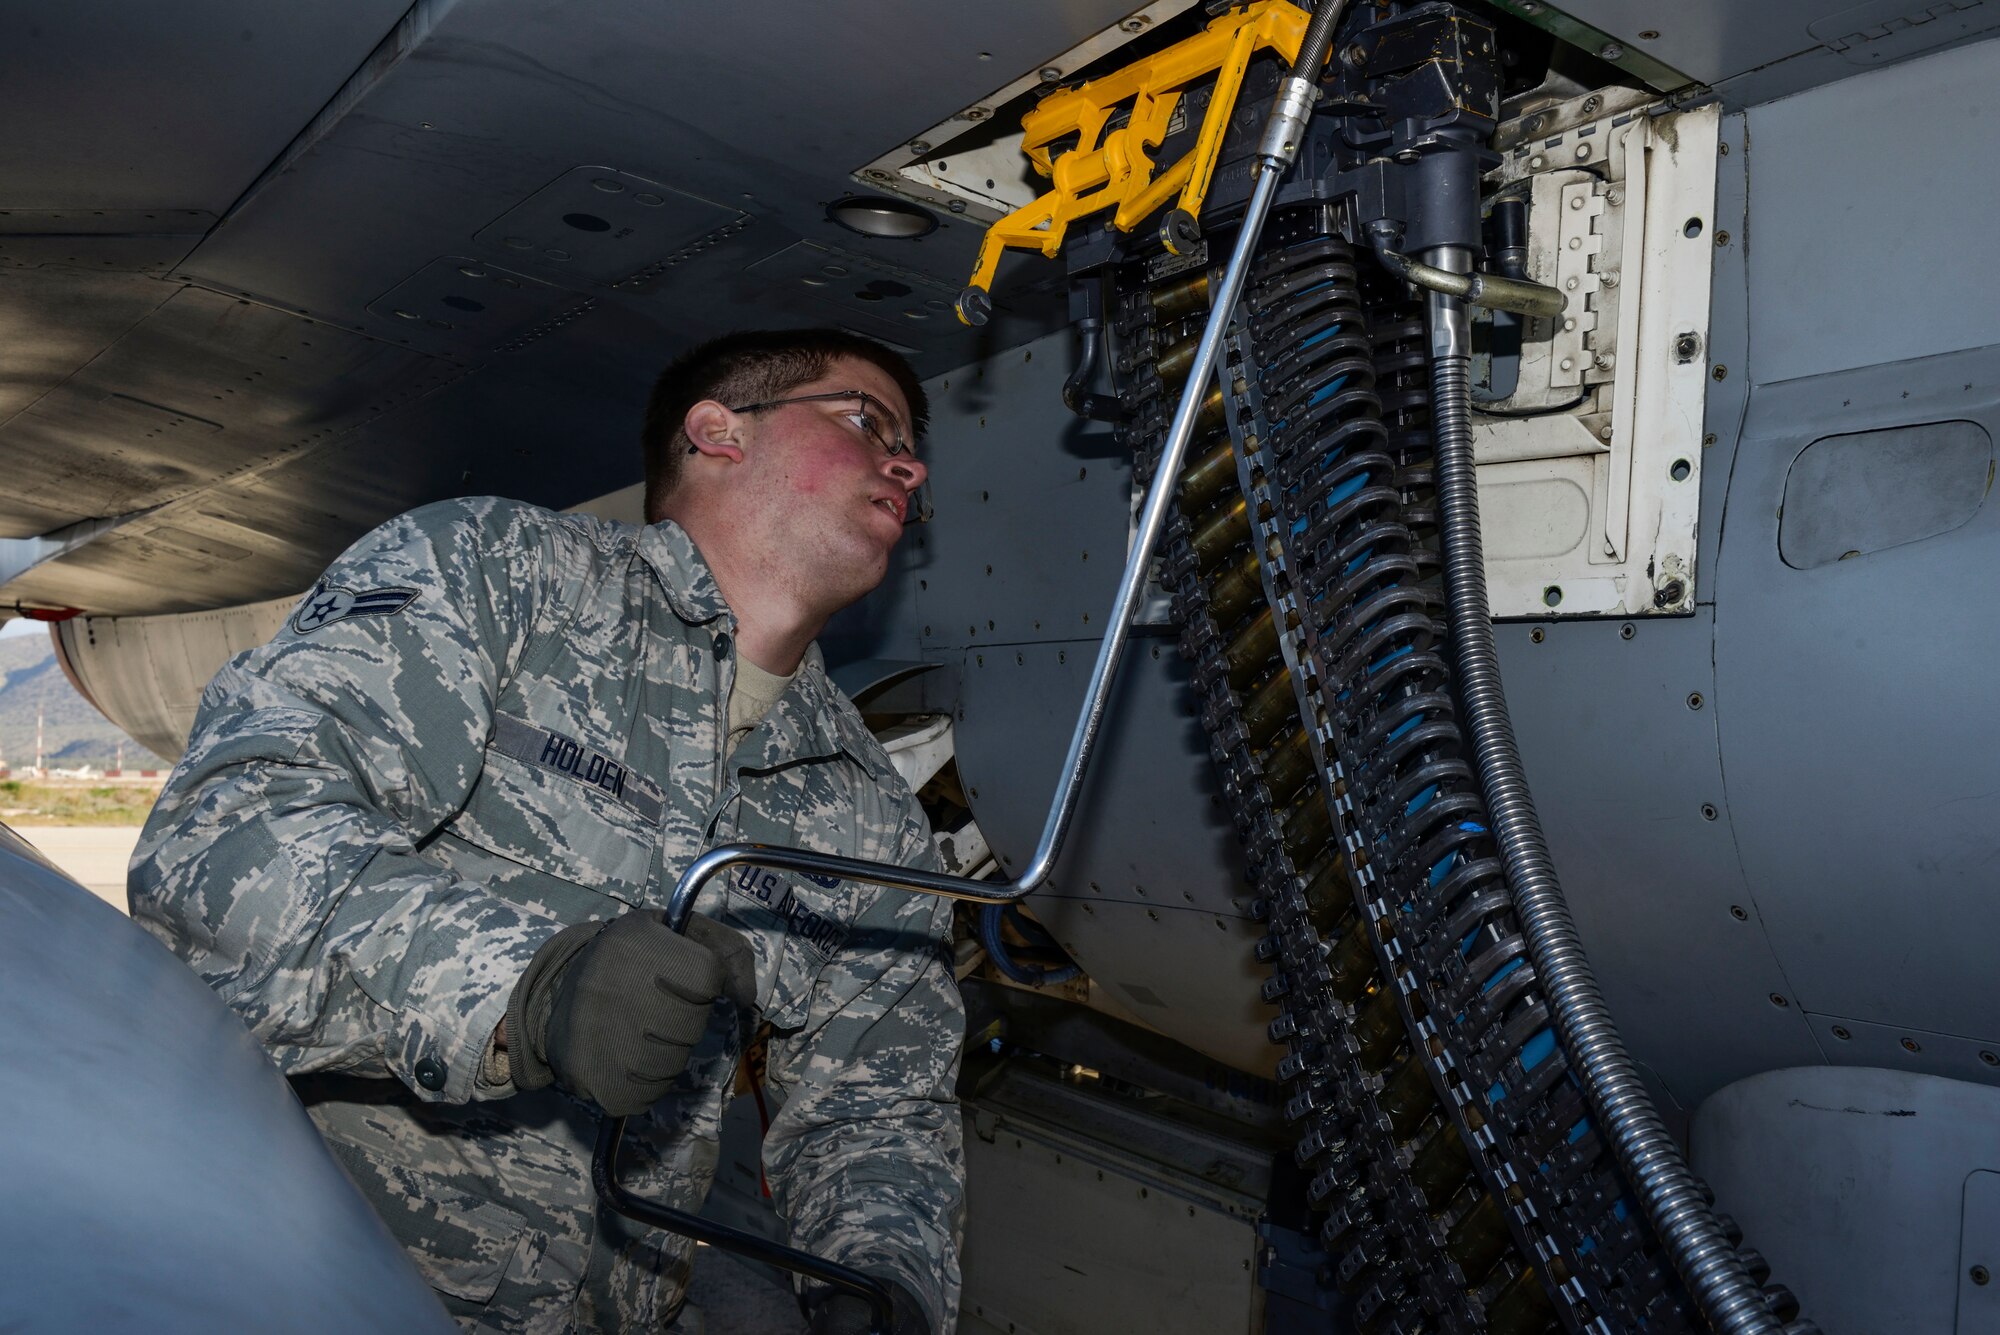 U.S. Air Force Airman 1st Class Austin Holden, a weapons load crew member assigned to the 480th Expeditionary Fighter Squadron, Spangdahlem Air Base, Germany, uses a universal ammunition loading system to load 20 mm practice rounds into an F-16 Fighting Falcon fighter aircraft during a flying training deployment on the flightline at Souda Bay, Greece, Jan. 29, 2016. The inert munitions used during the FTD simulate real conditions the 480th EFS pilots might use when engaging enemy forces. (U.S. Air Force photo by Staff Sgt. Christopher Ruano/Released)